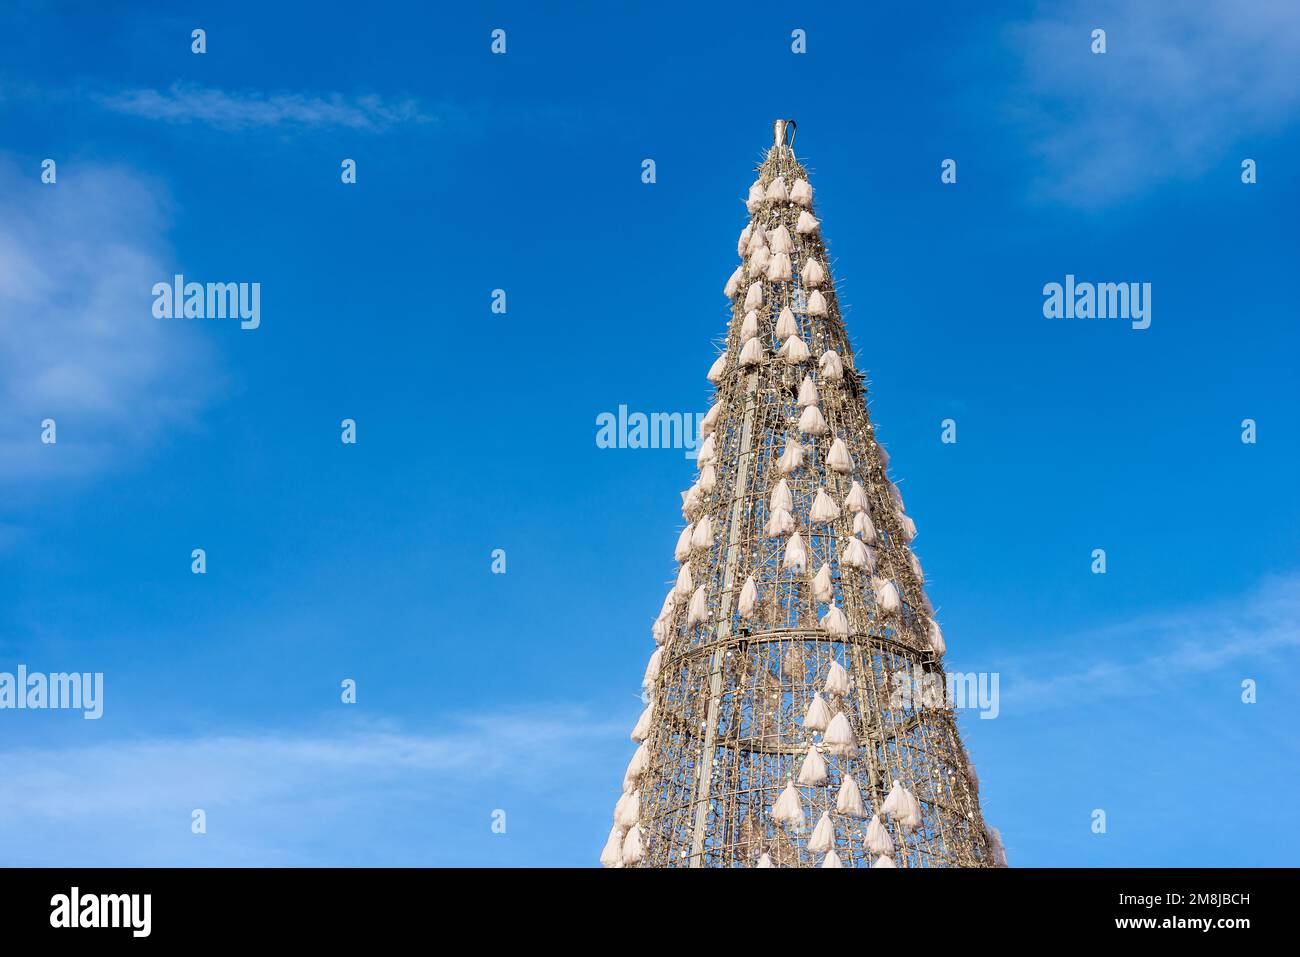 Closeup of a Christmas Tree (high section, photography) against a clear blue sky with copy space. Plaza Mayor (main square), Madrid downtown, Spain. Stock Photo